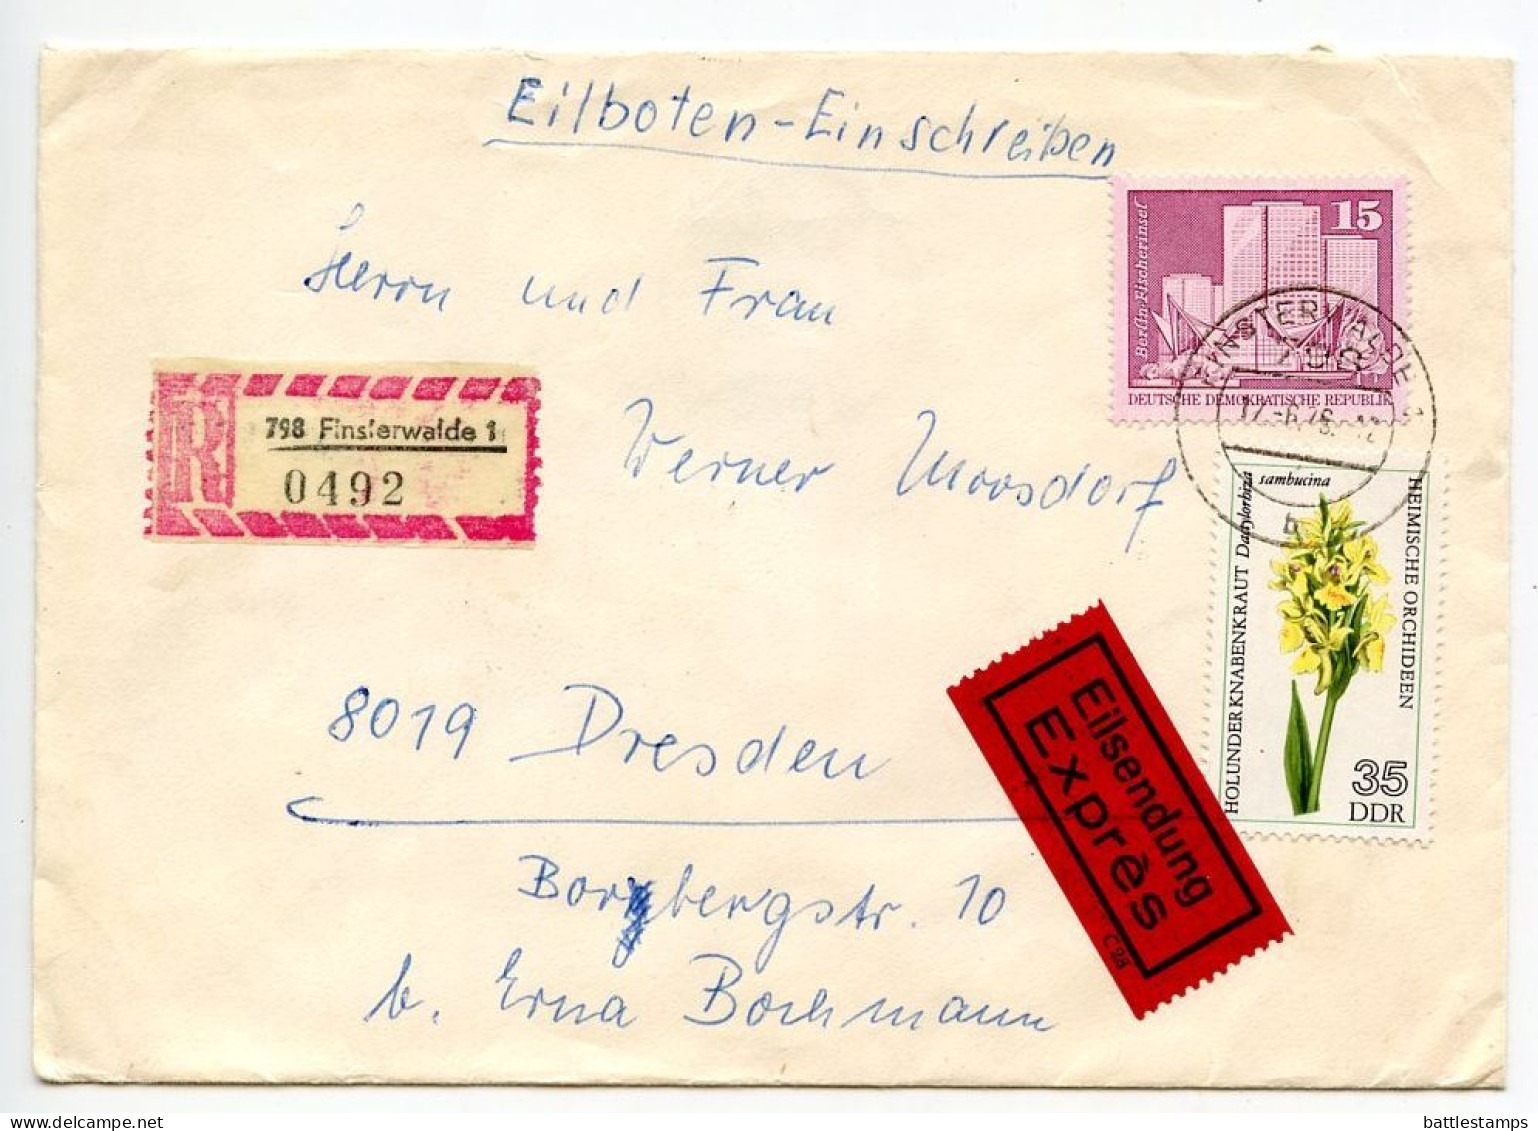 Germany East 1976 Registered Express Cover; Finsterwalde To Dresden; Orchid Flower Stamps; Bahnpost Postmarks - Covers & Documents